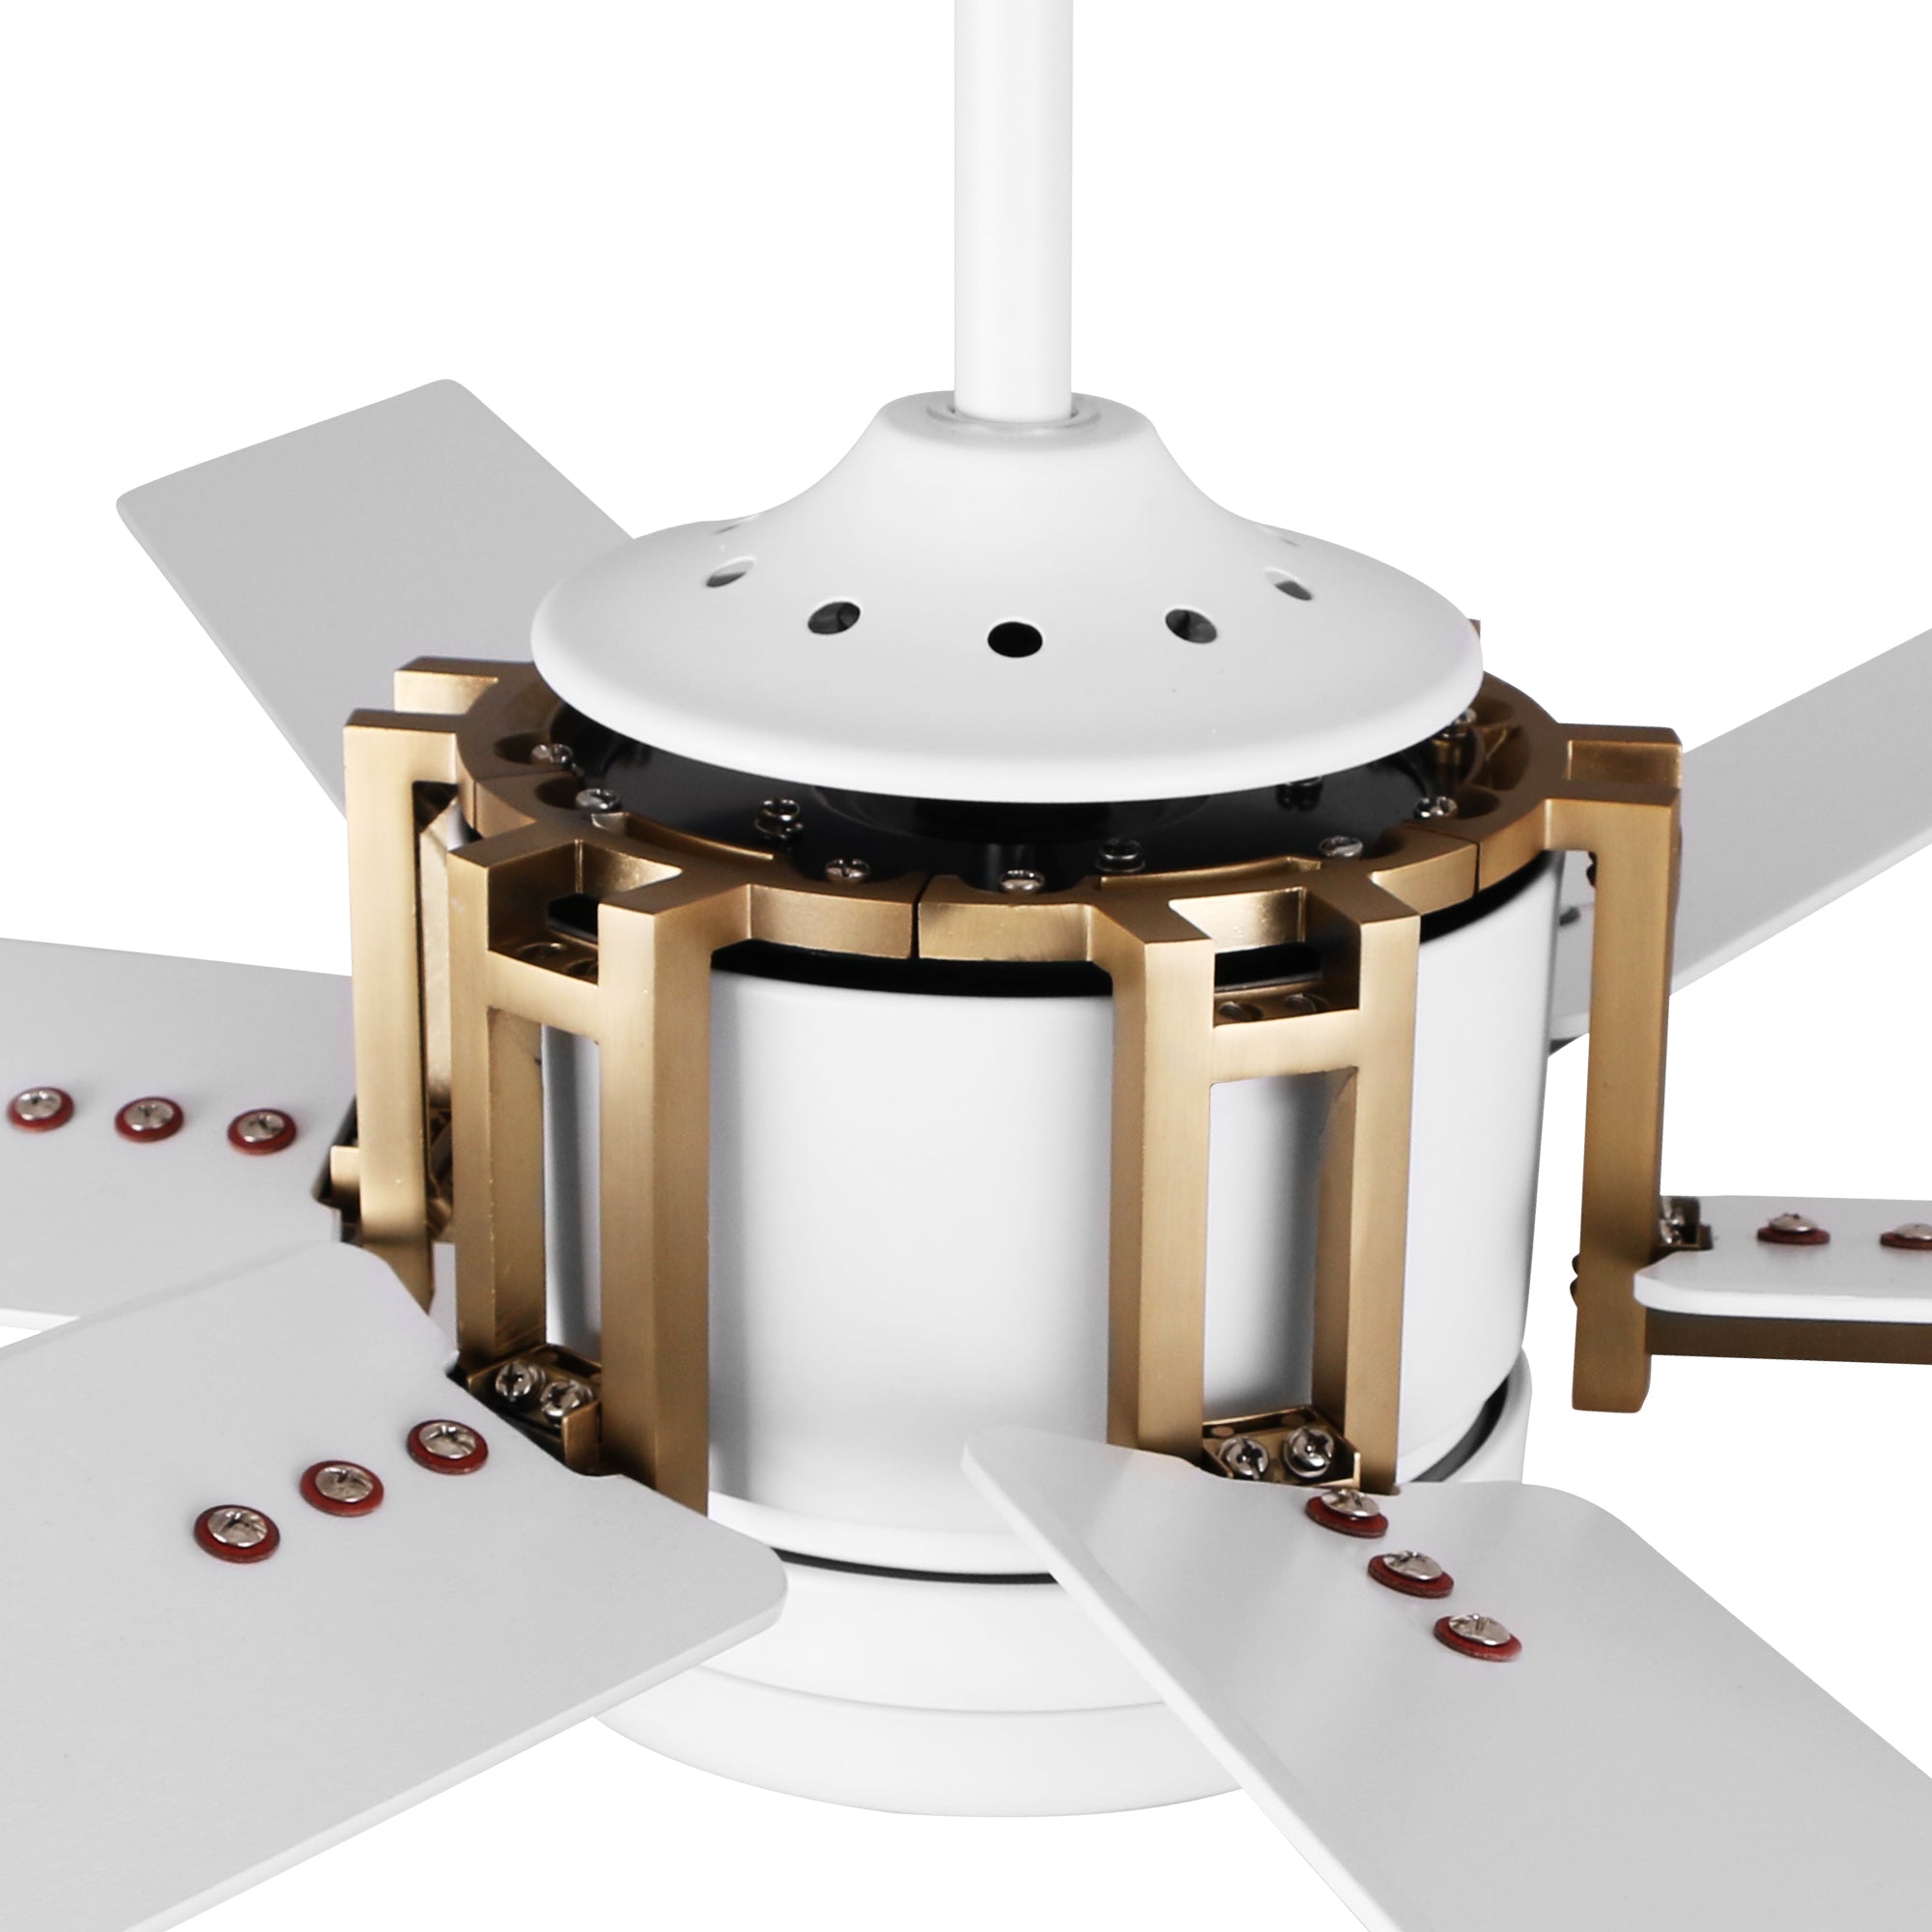 This Sennin 52&#39;&#39; ceiling fan keeps your space cool, bright, and stylish. It is a soft modern masterpiece perfect for your indoor living spaces. This ceiling fan is a simplicity designing with White finish, use elegant Plywood blades and has an integrated 6000K LED daylight. The fan features remote control.